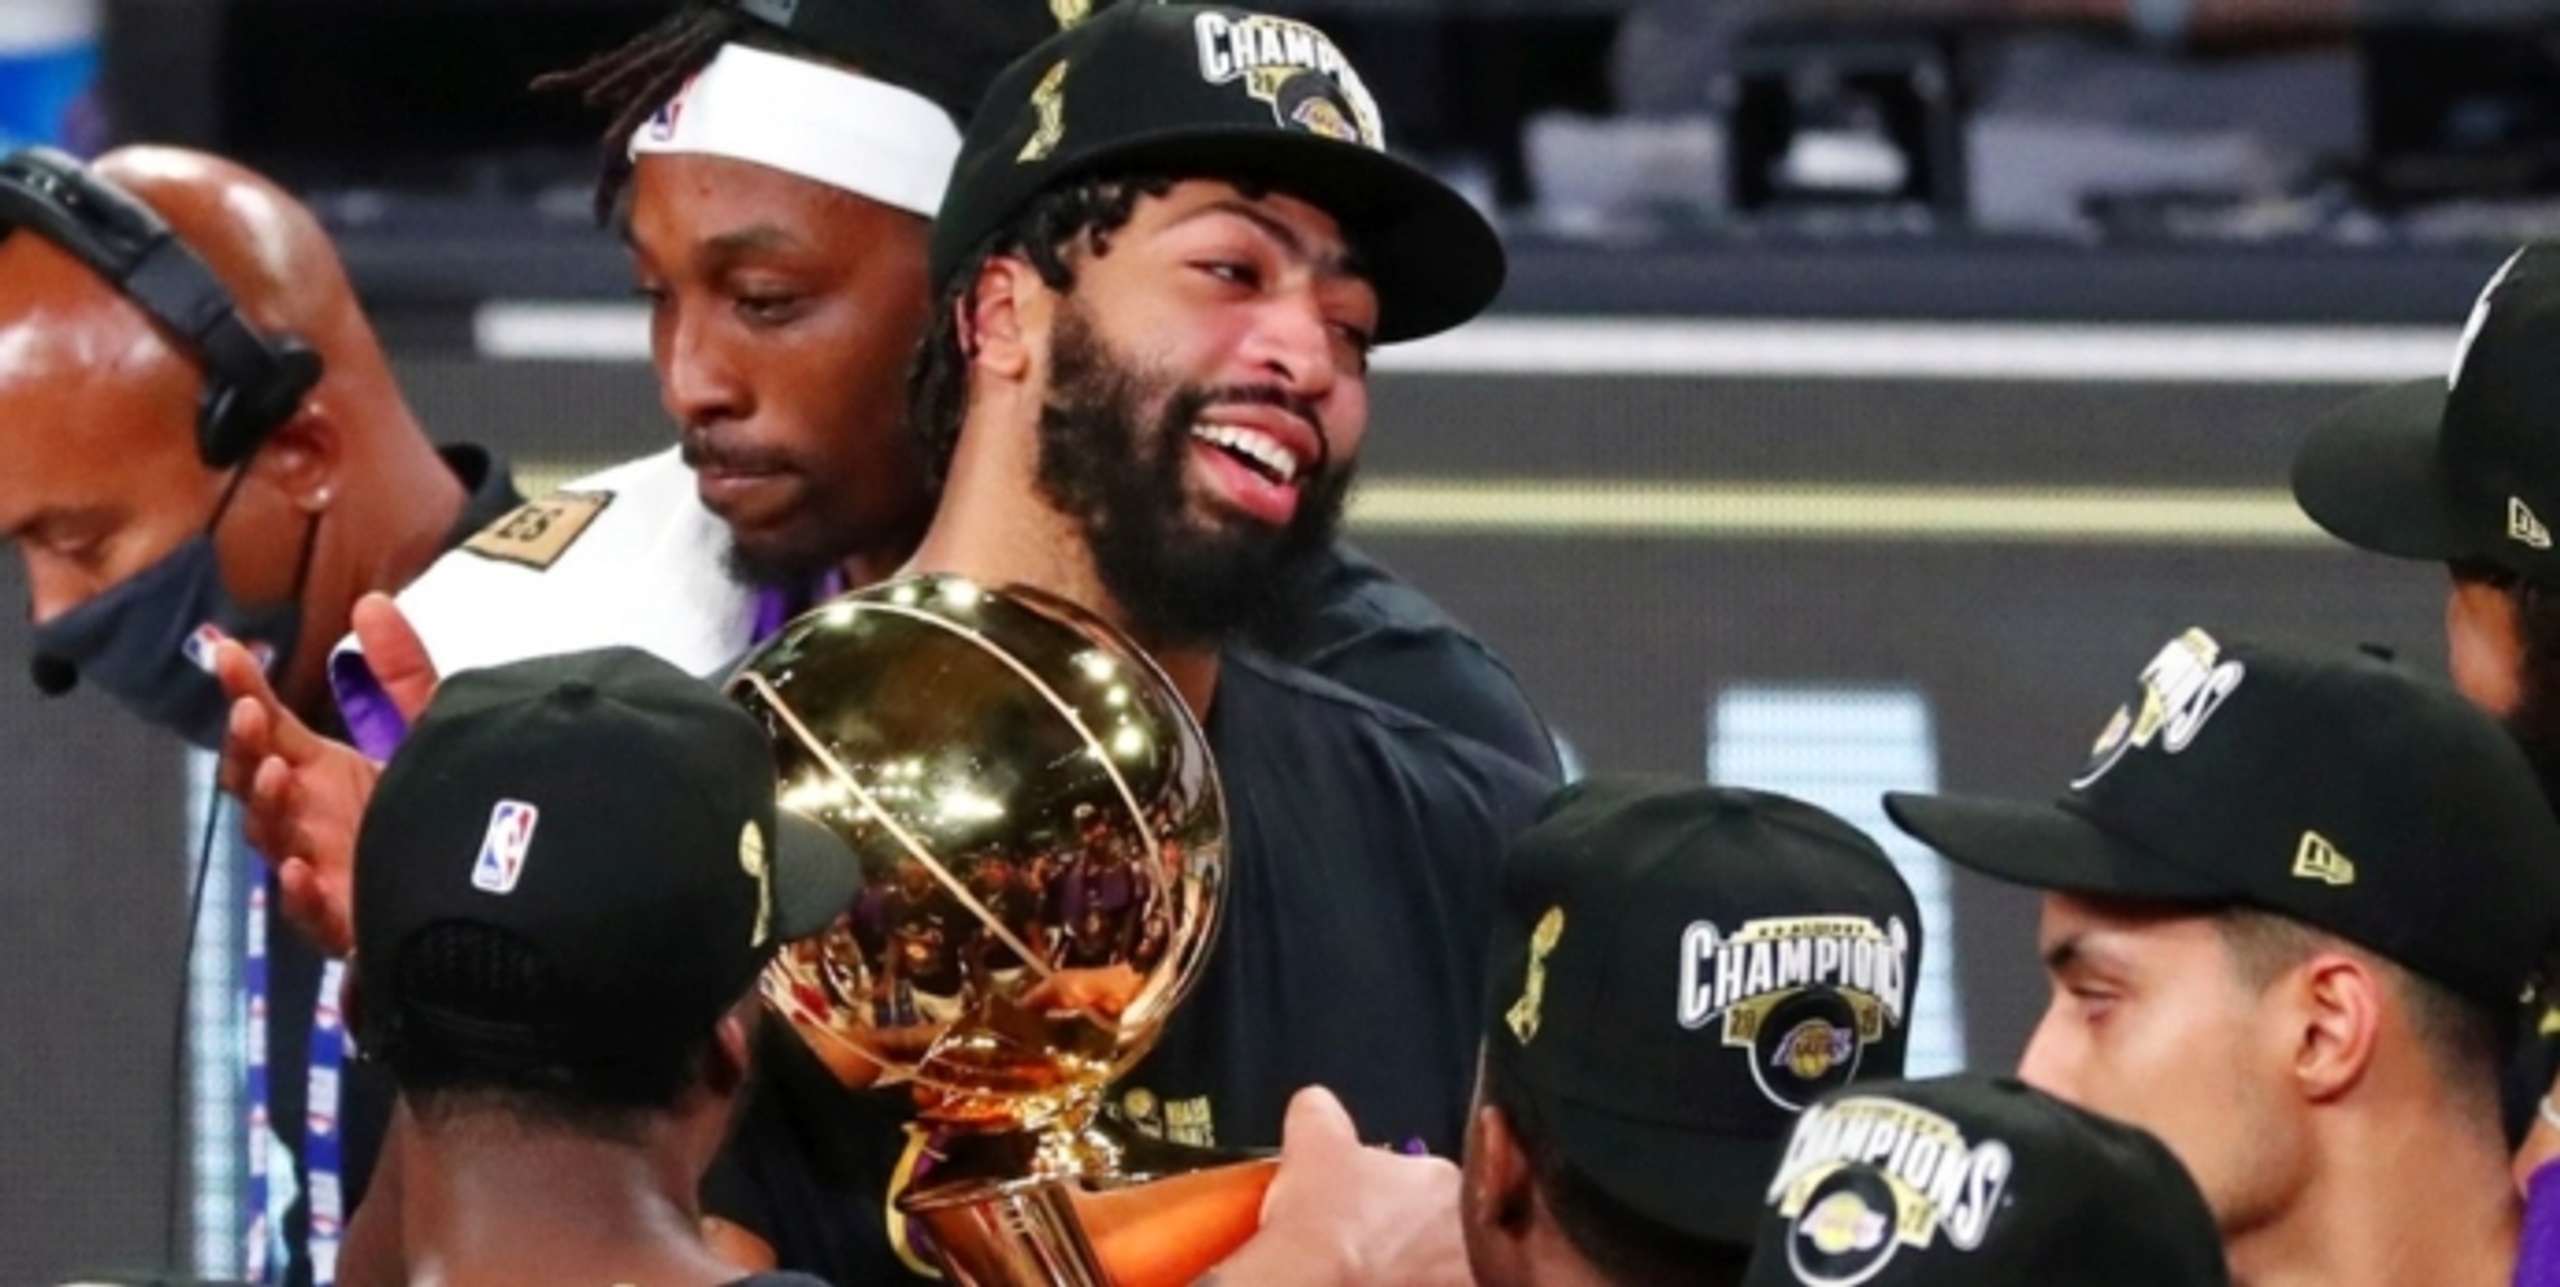 The Lakers' trade for Anthony Davis paid off